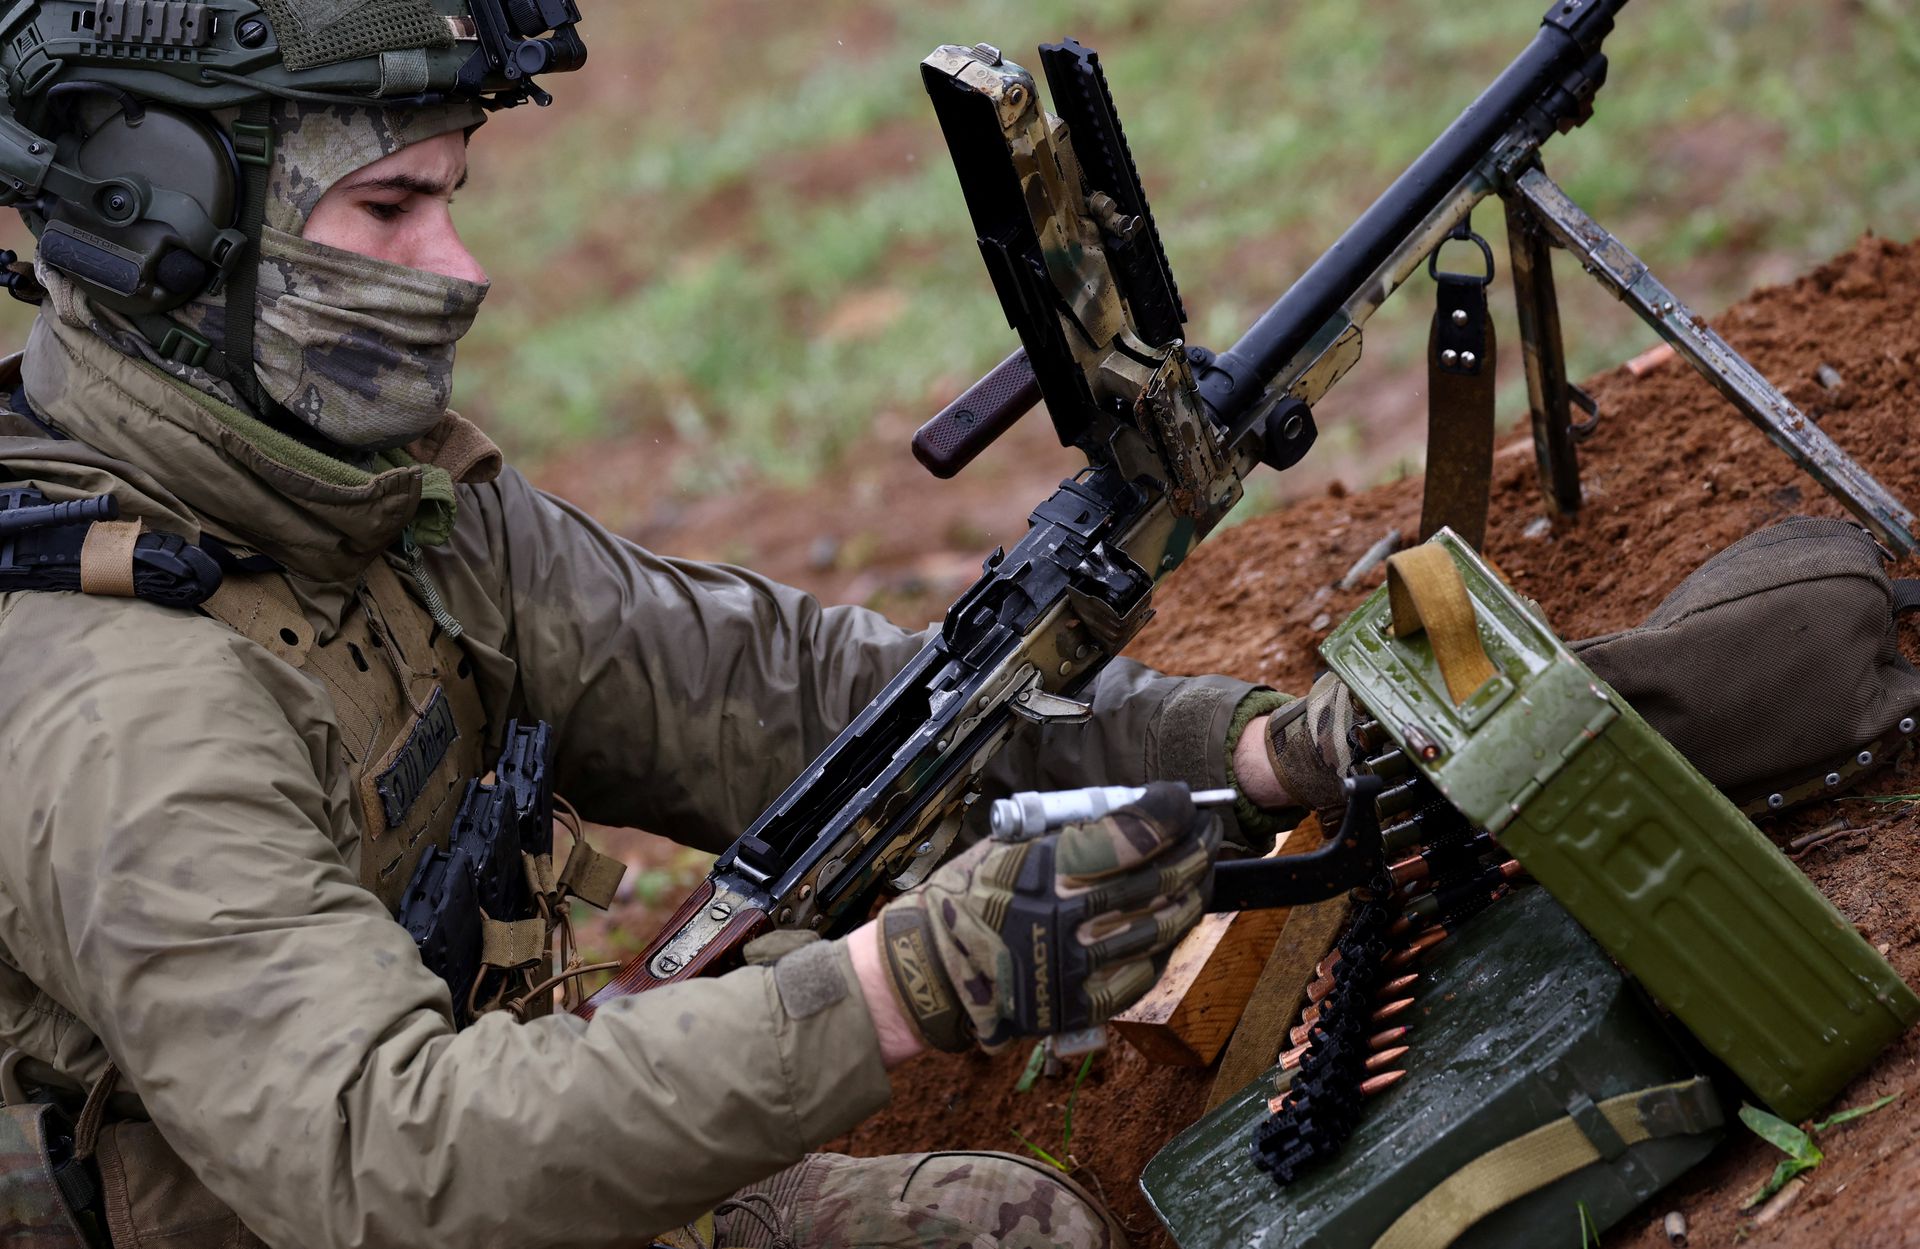 A member of the Ukrainian special forces manipulates his machine gun prior to a mission